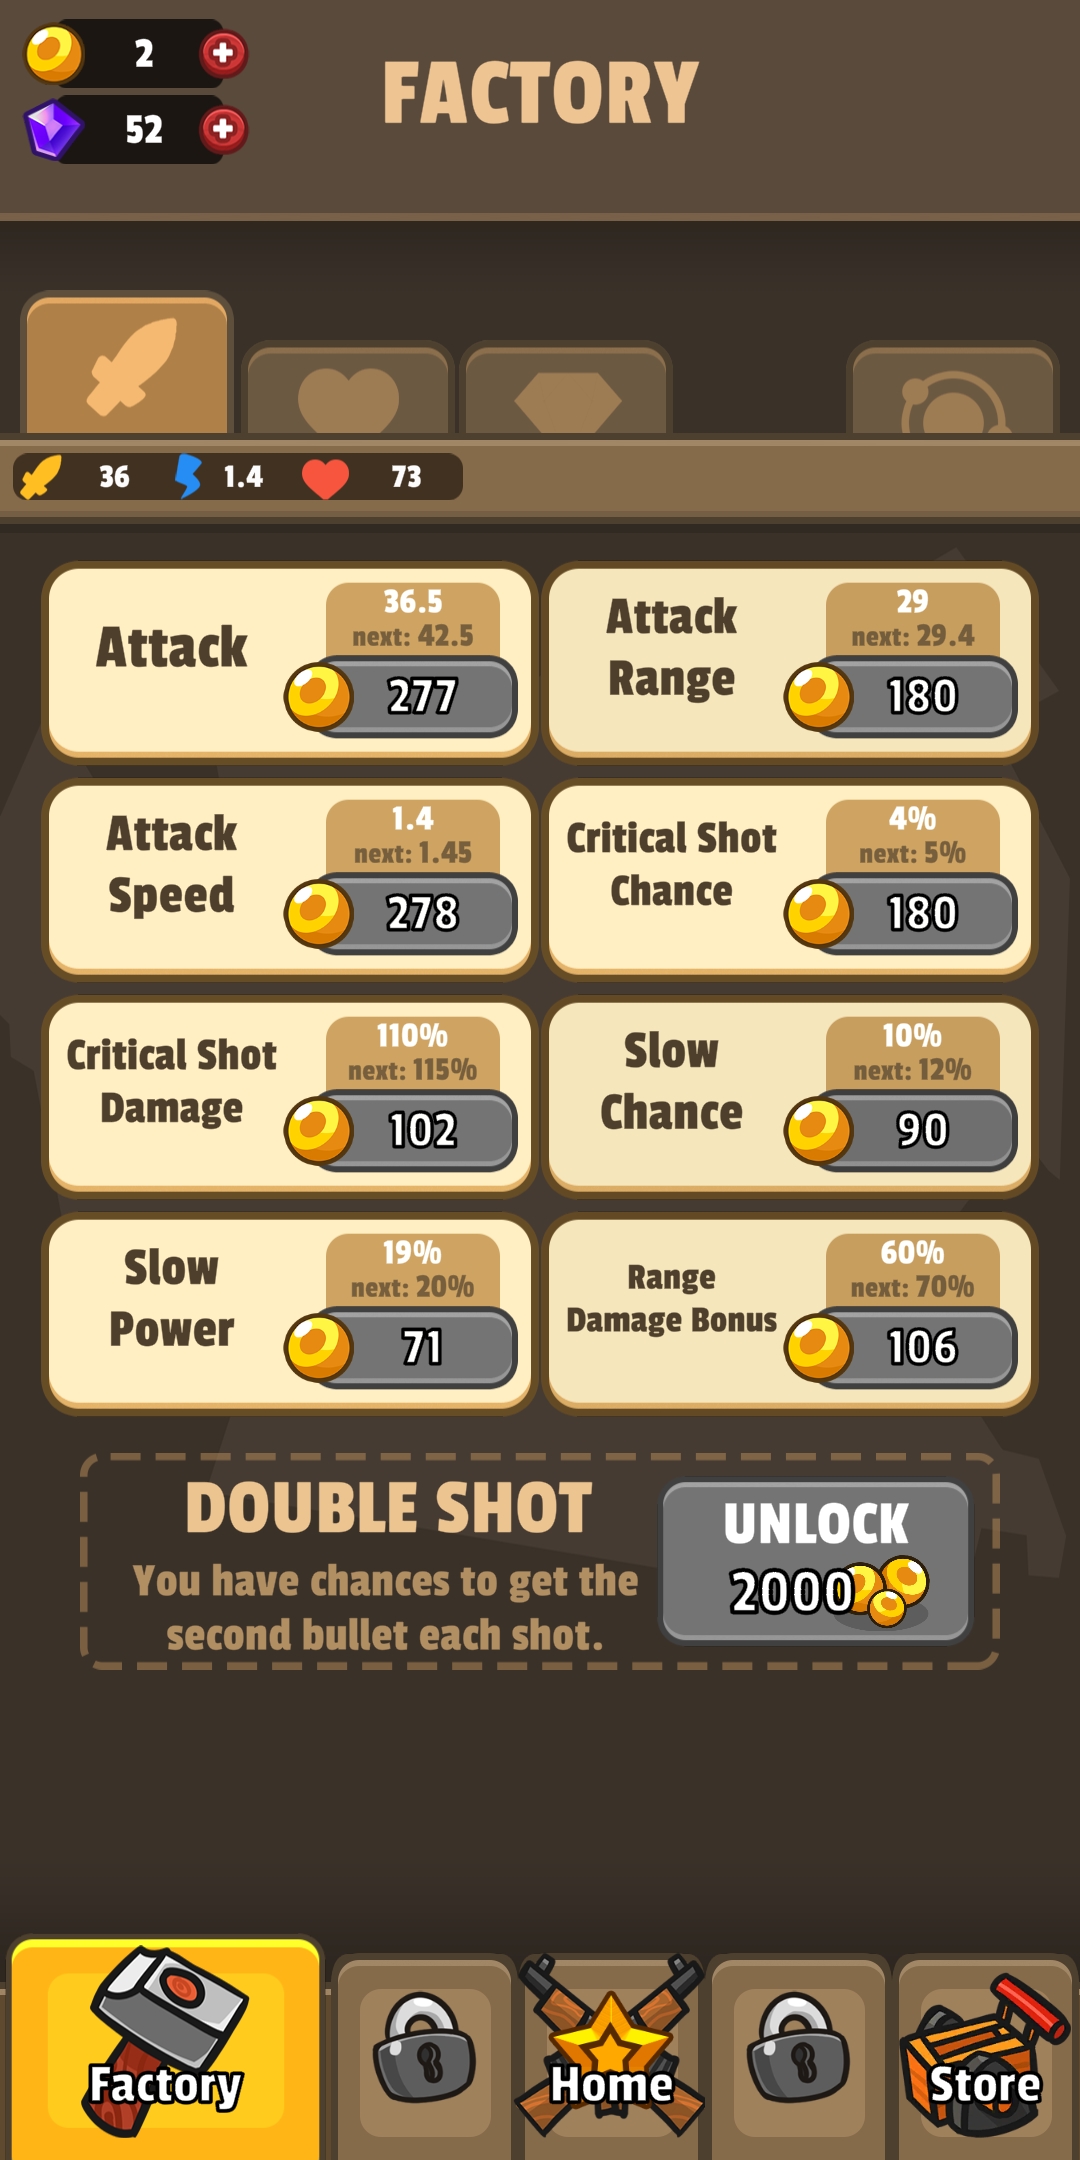 In-game screenshot of the upgrade options in the main menu showing the upgrades available like attack, slow chance.